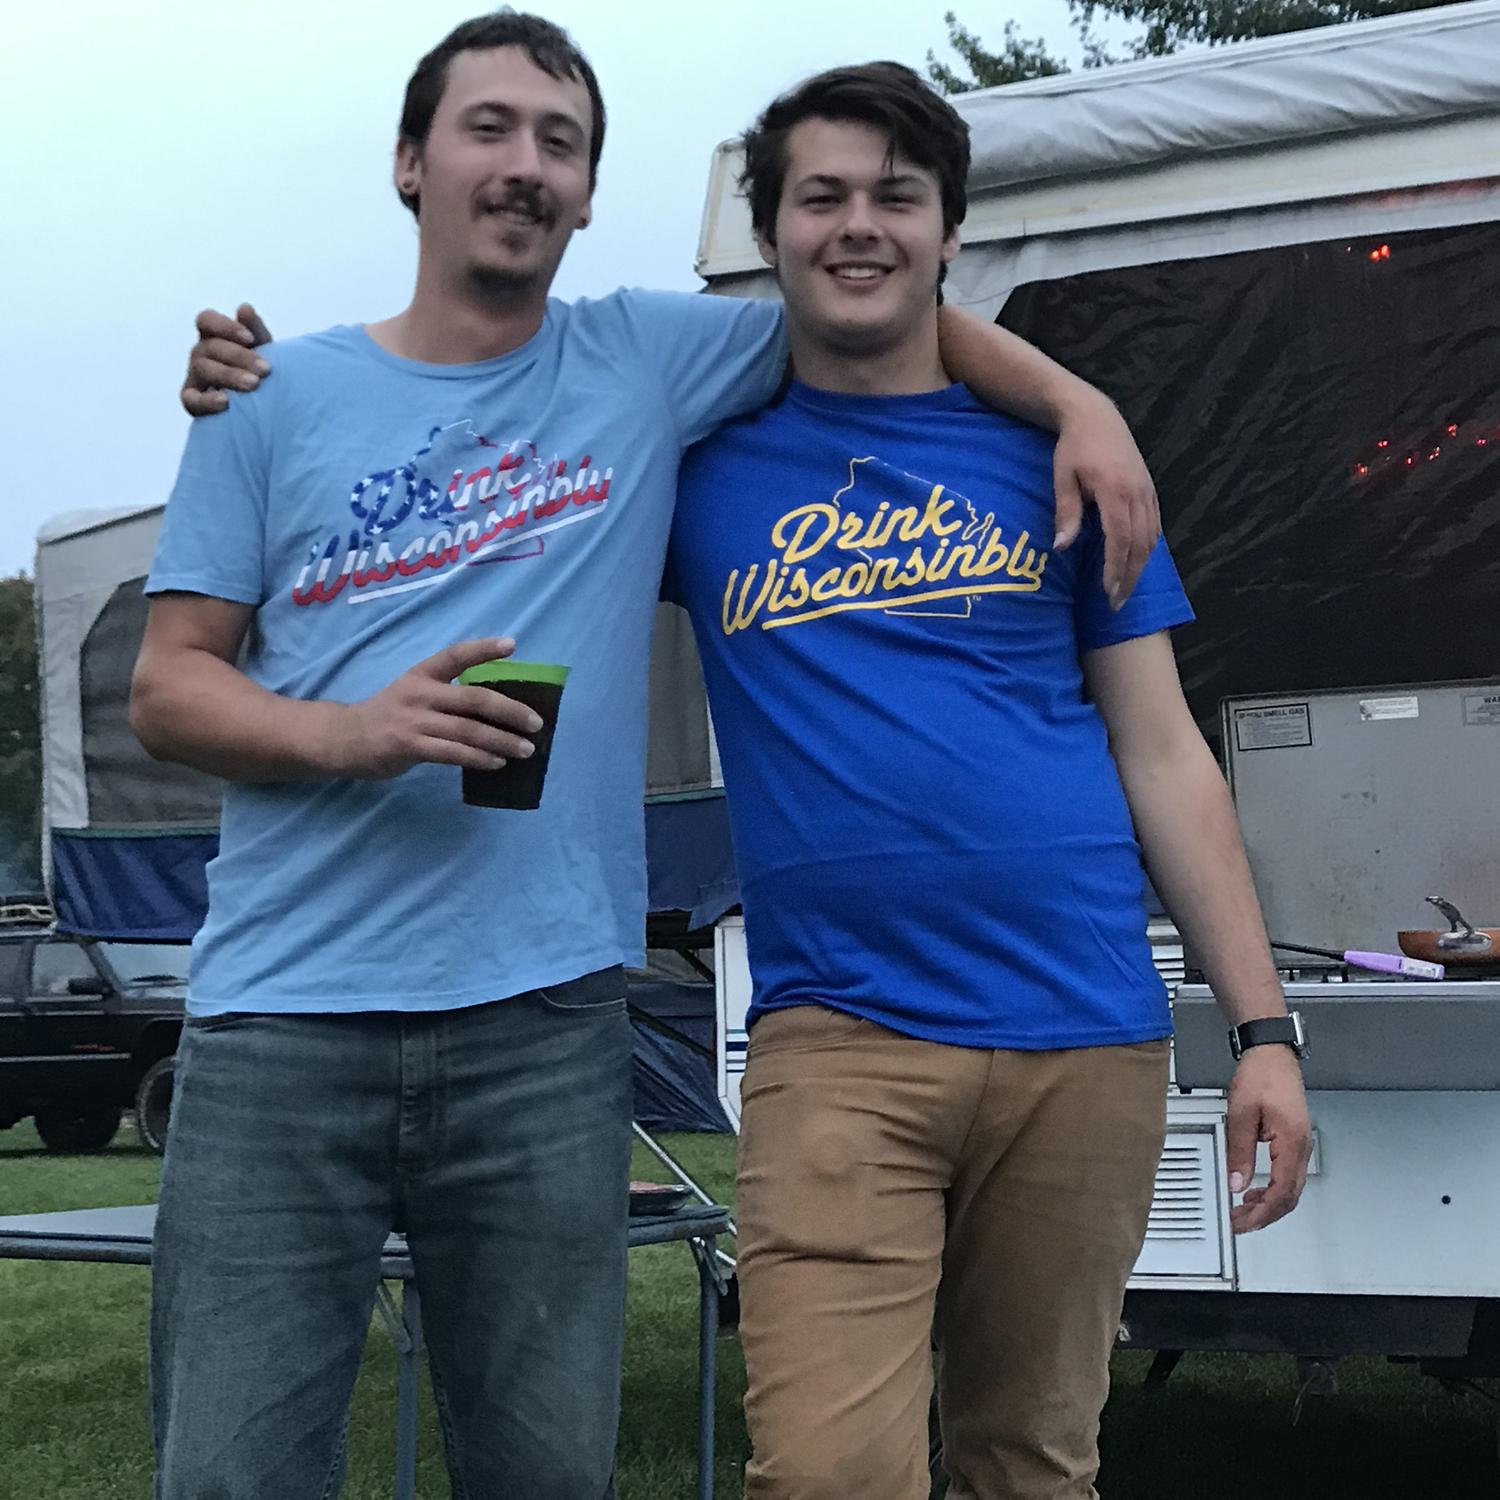 Brothers who have matching shirts 10/10